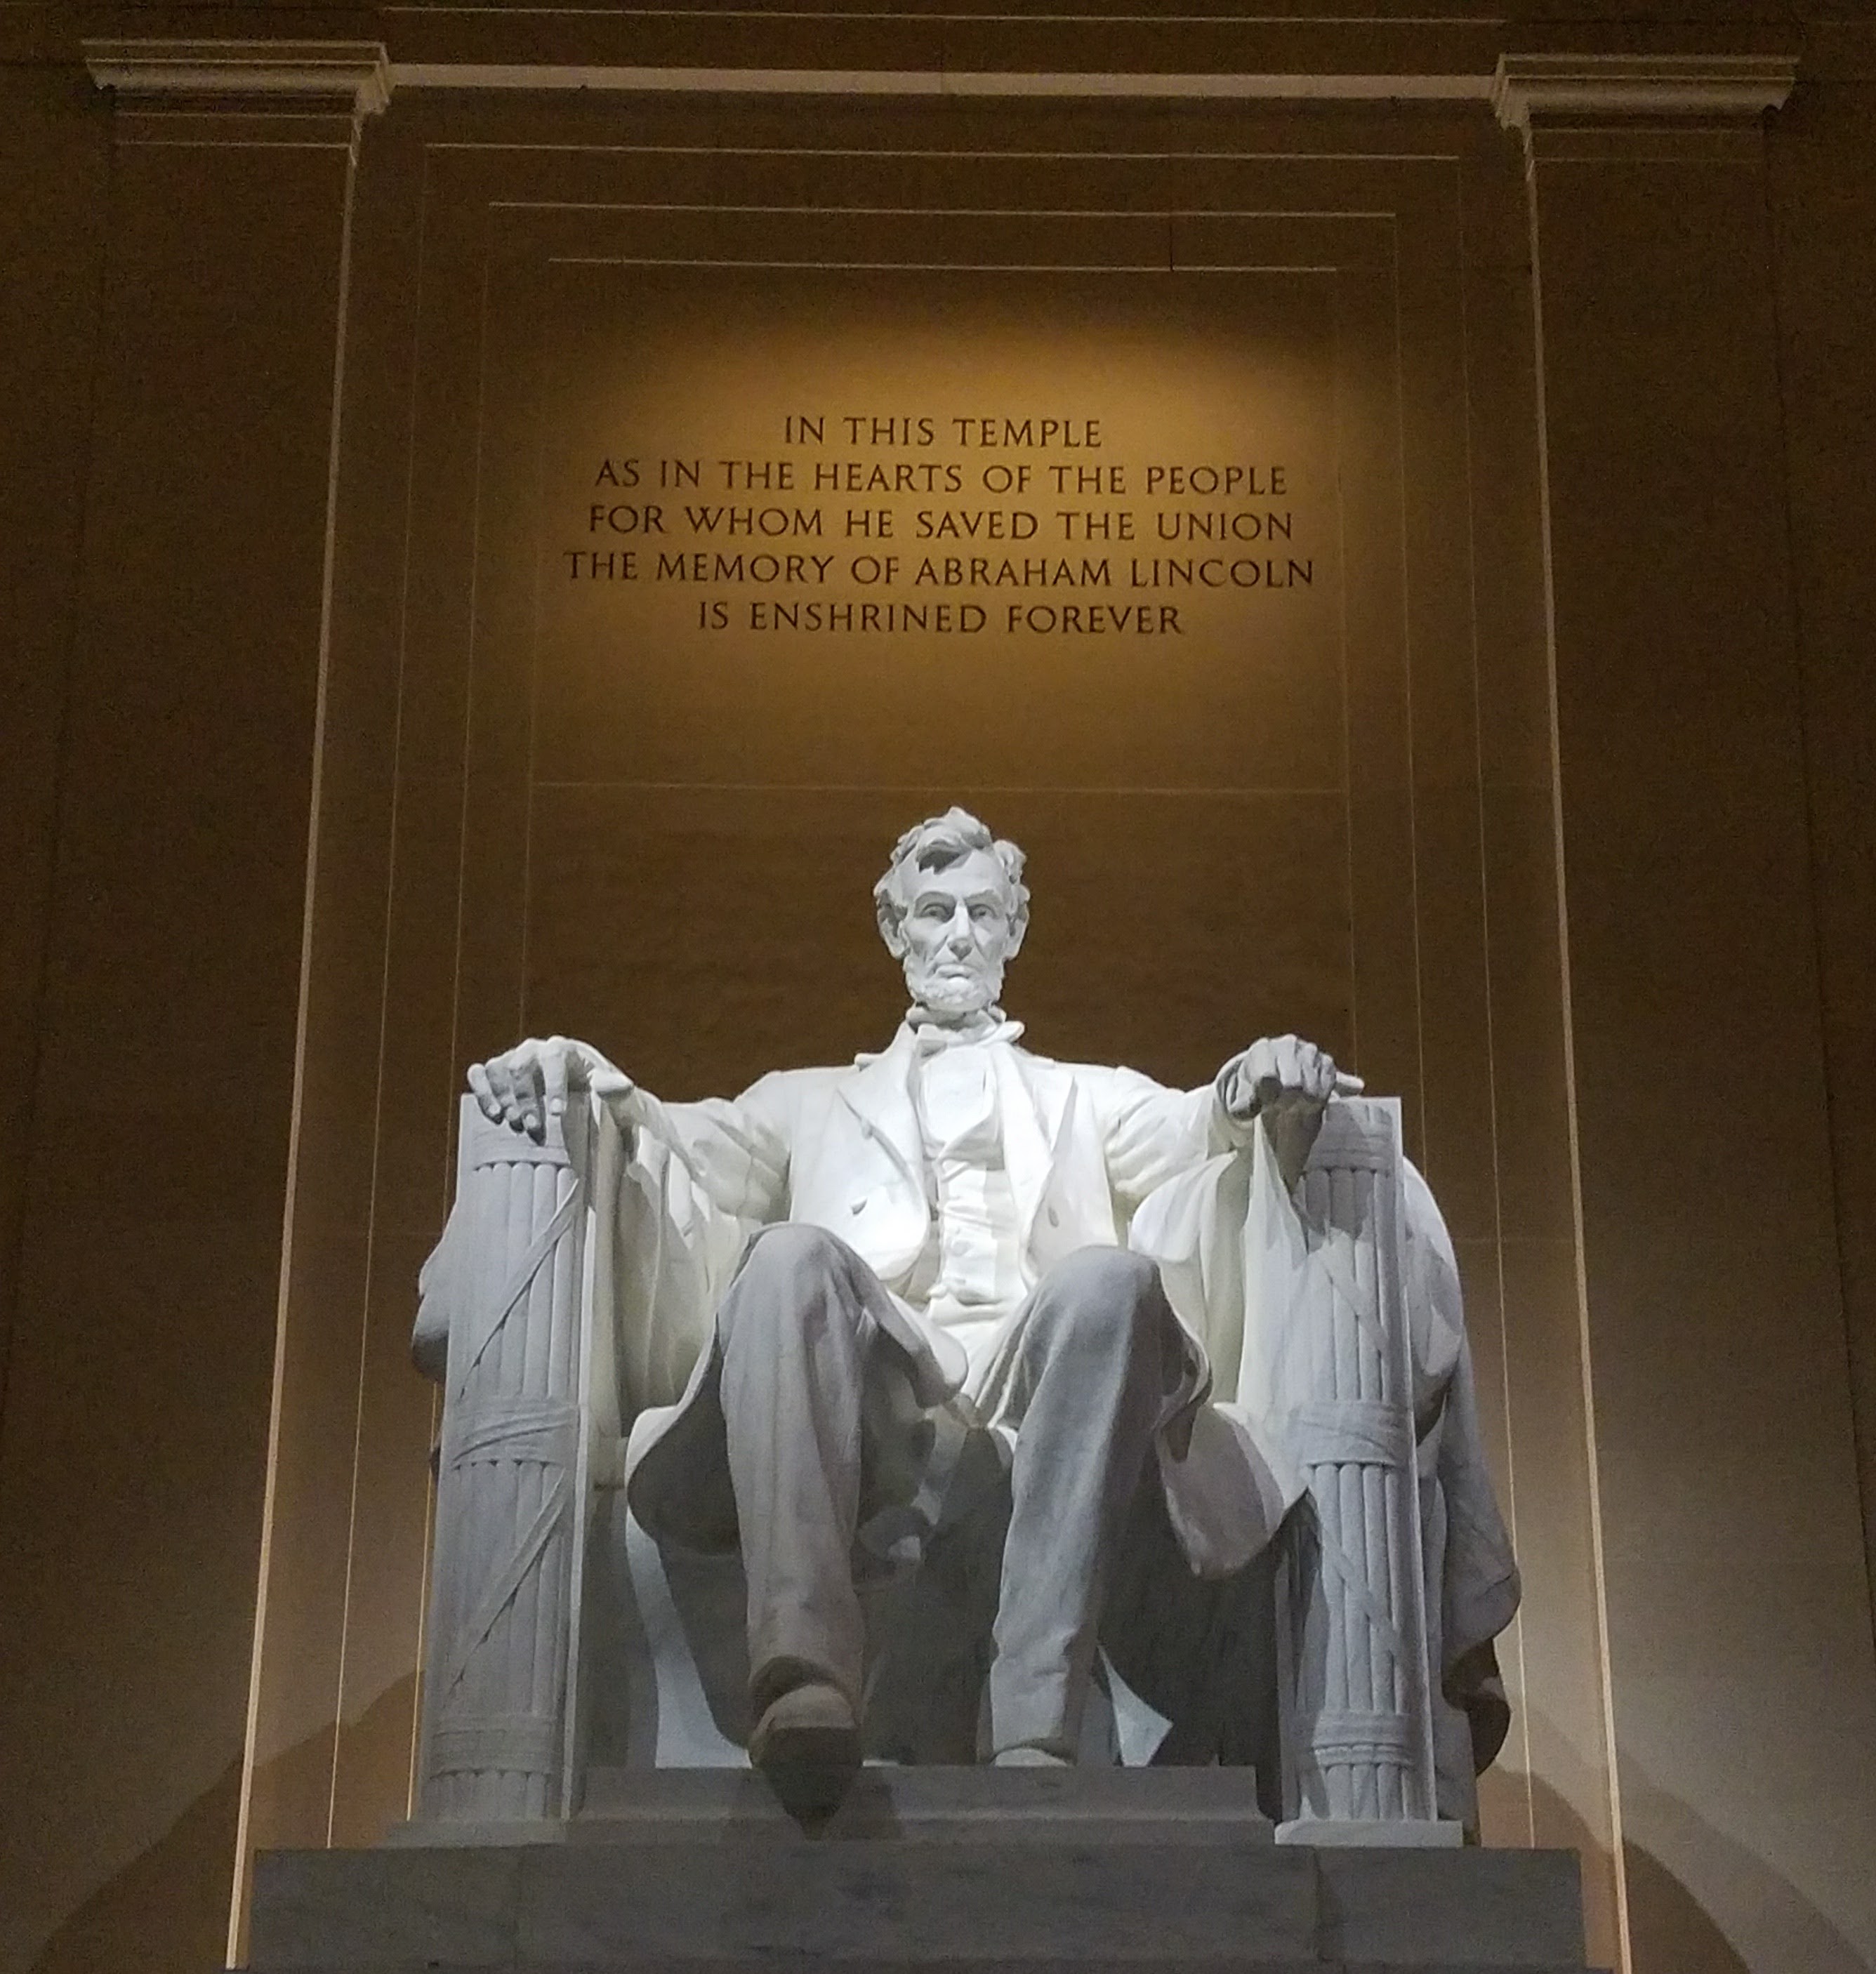 Abraham Lincoln v2 - The Lincoln Memorial, built to honor the 16th President of the United States, Abraham Lincoln.